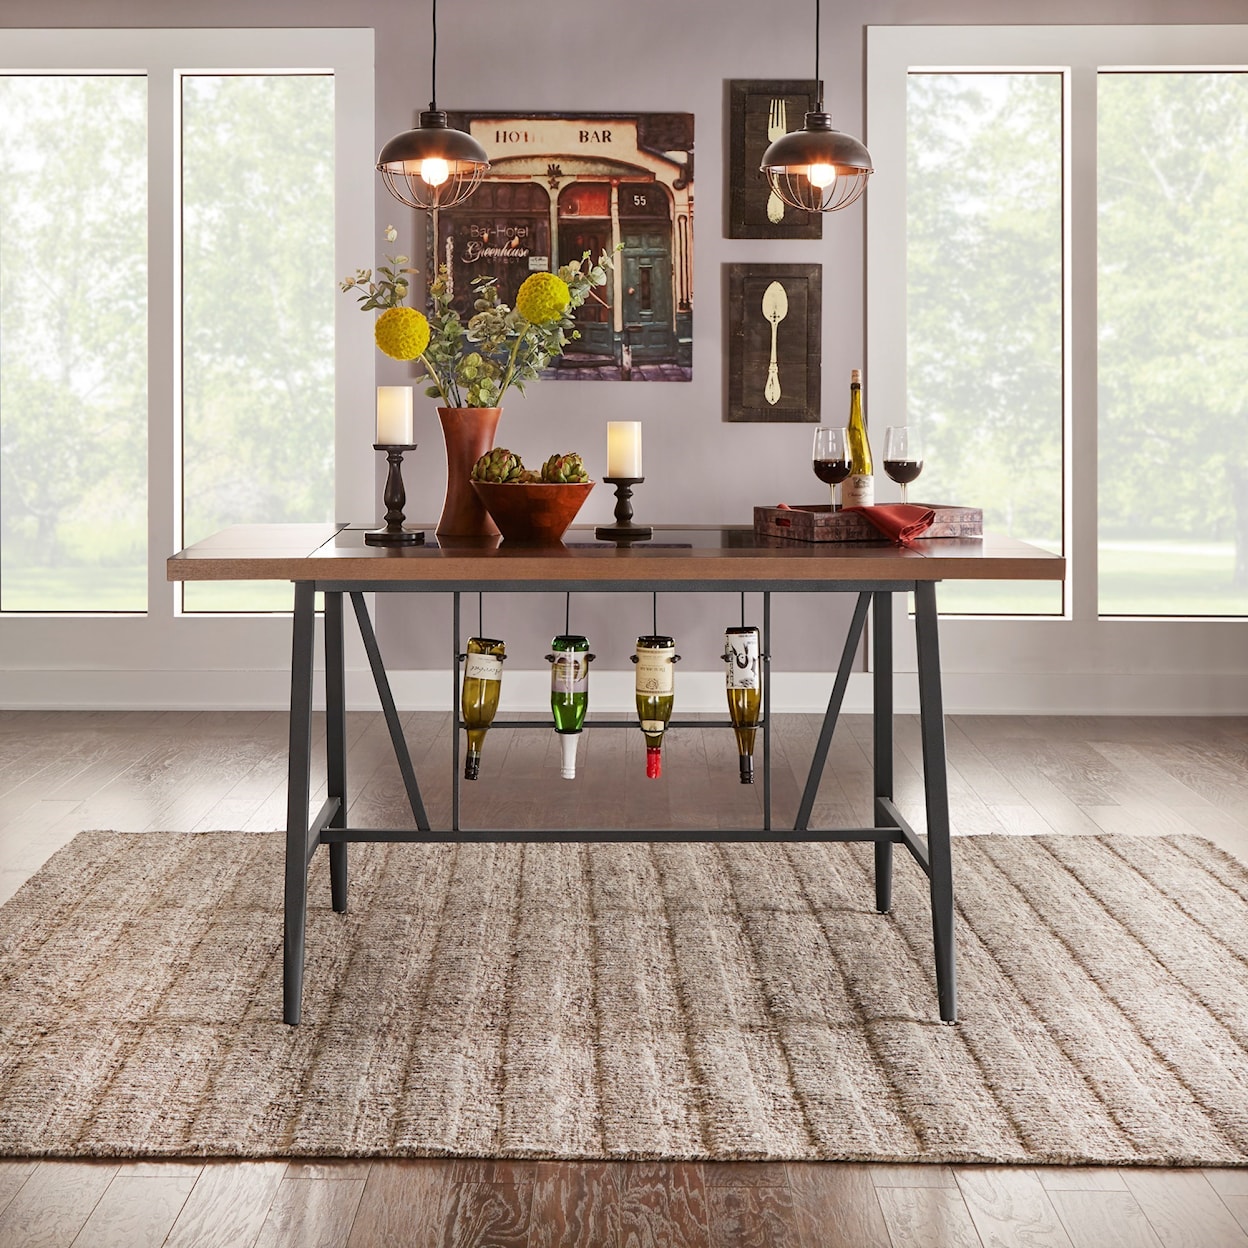 Homelegance Selbyville Counter Height Table with Glass Insert